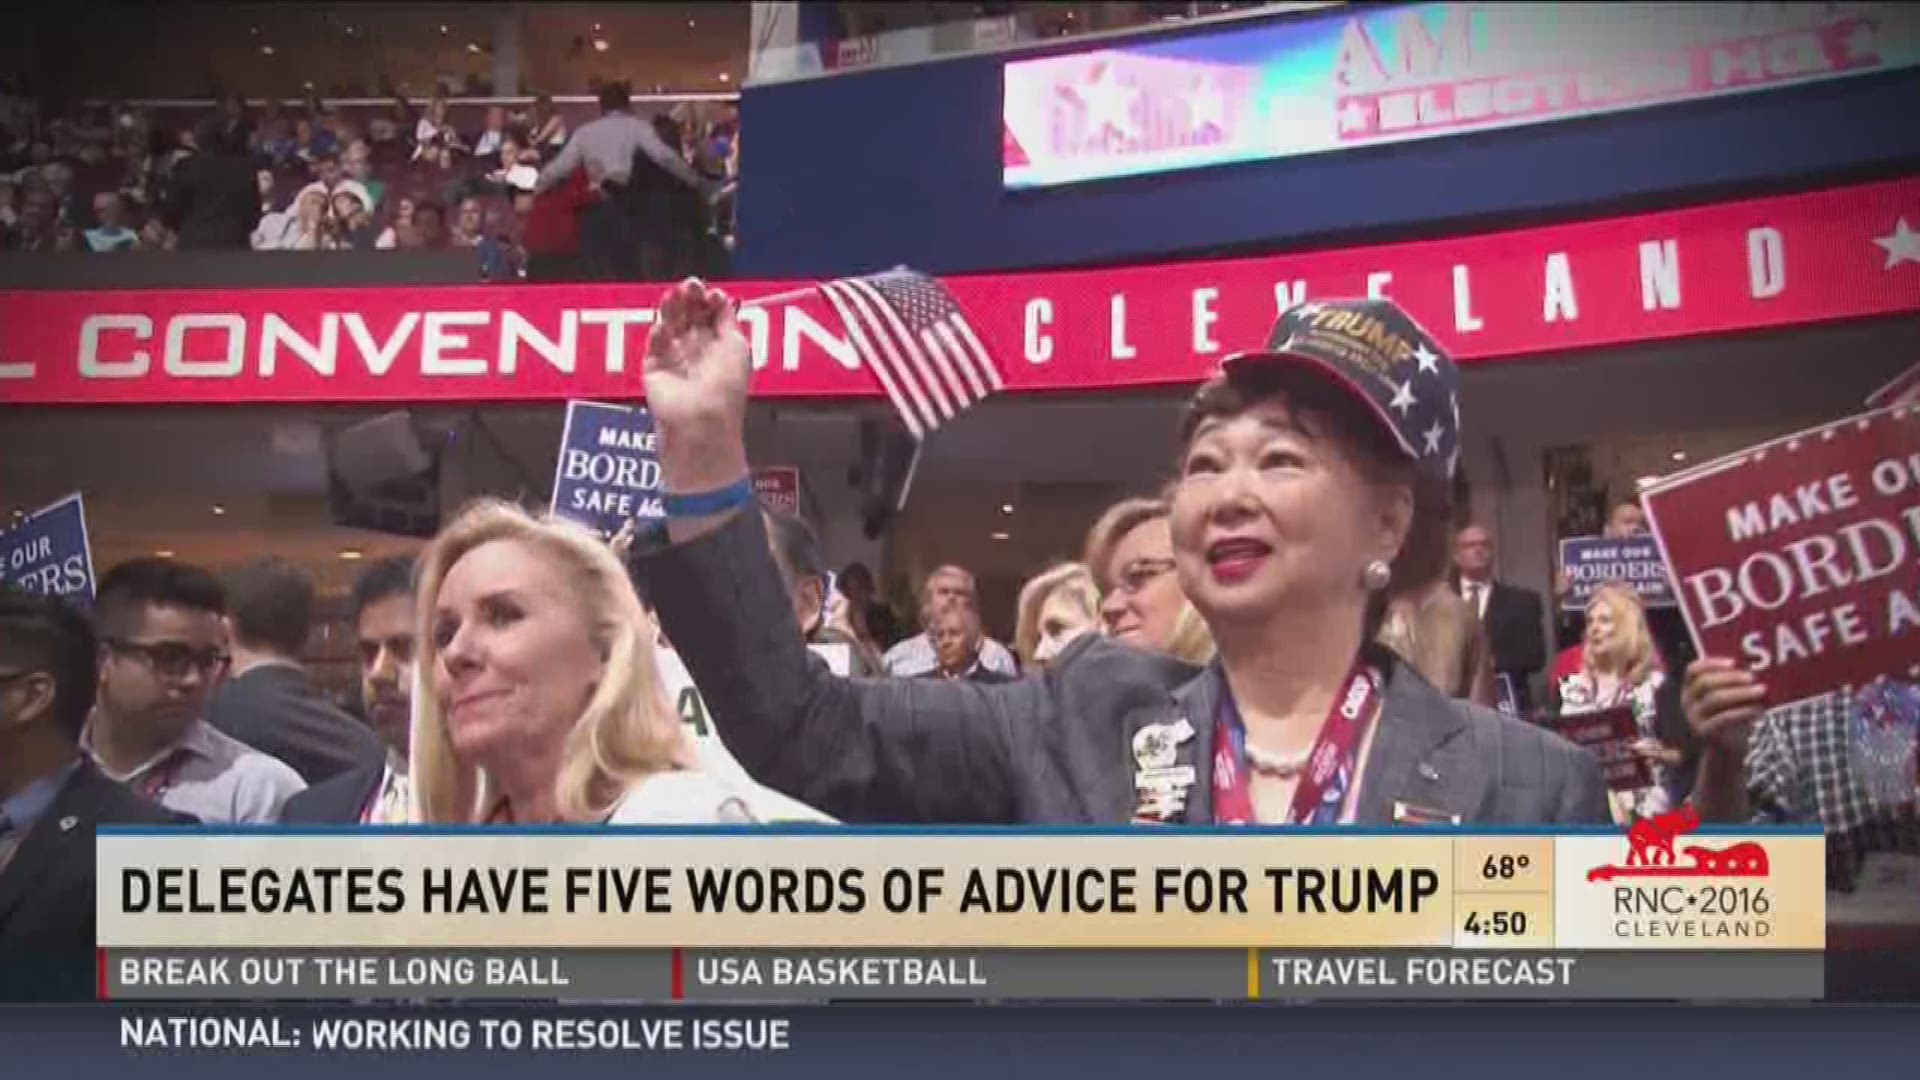 Delegates have five words of advice for Trump